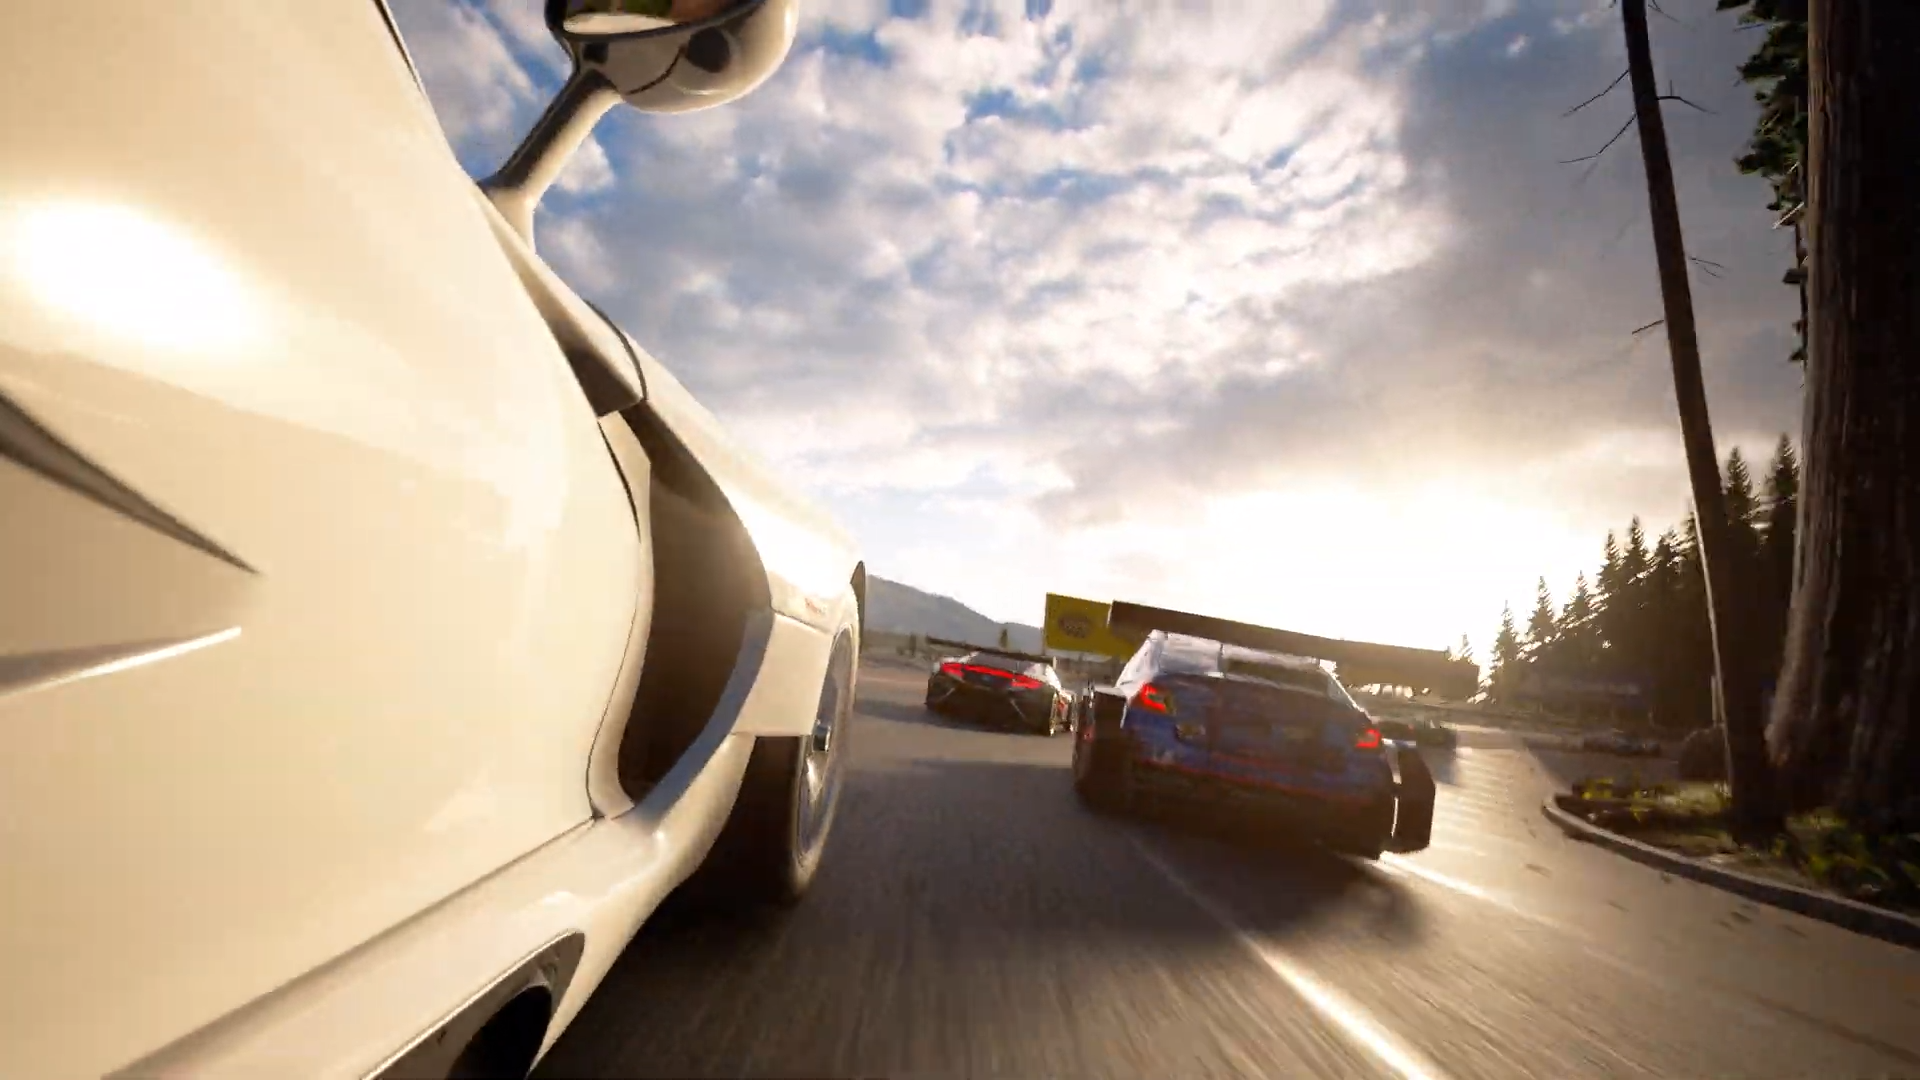 Gran Turismo 7 release date, leaks, GT7 news and more. Tom's Guide